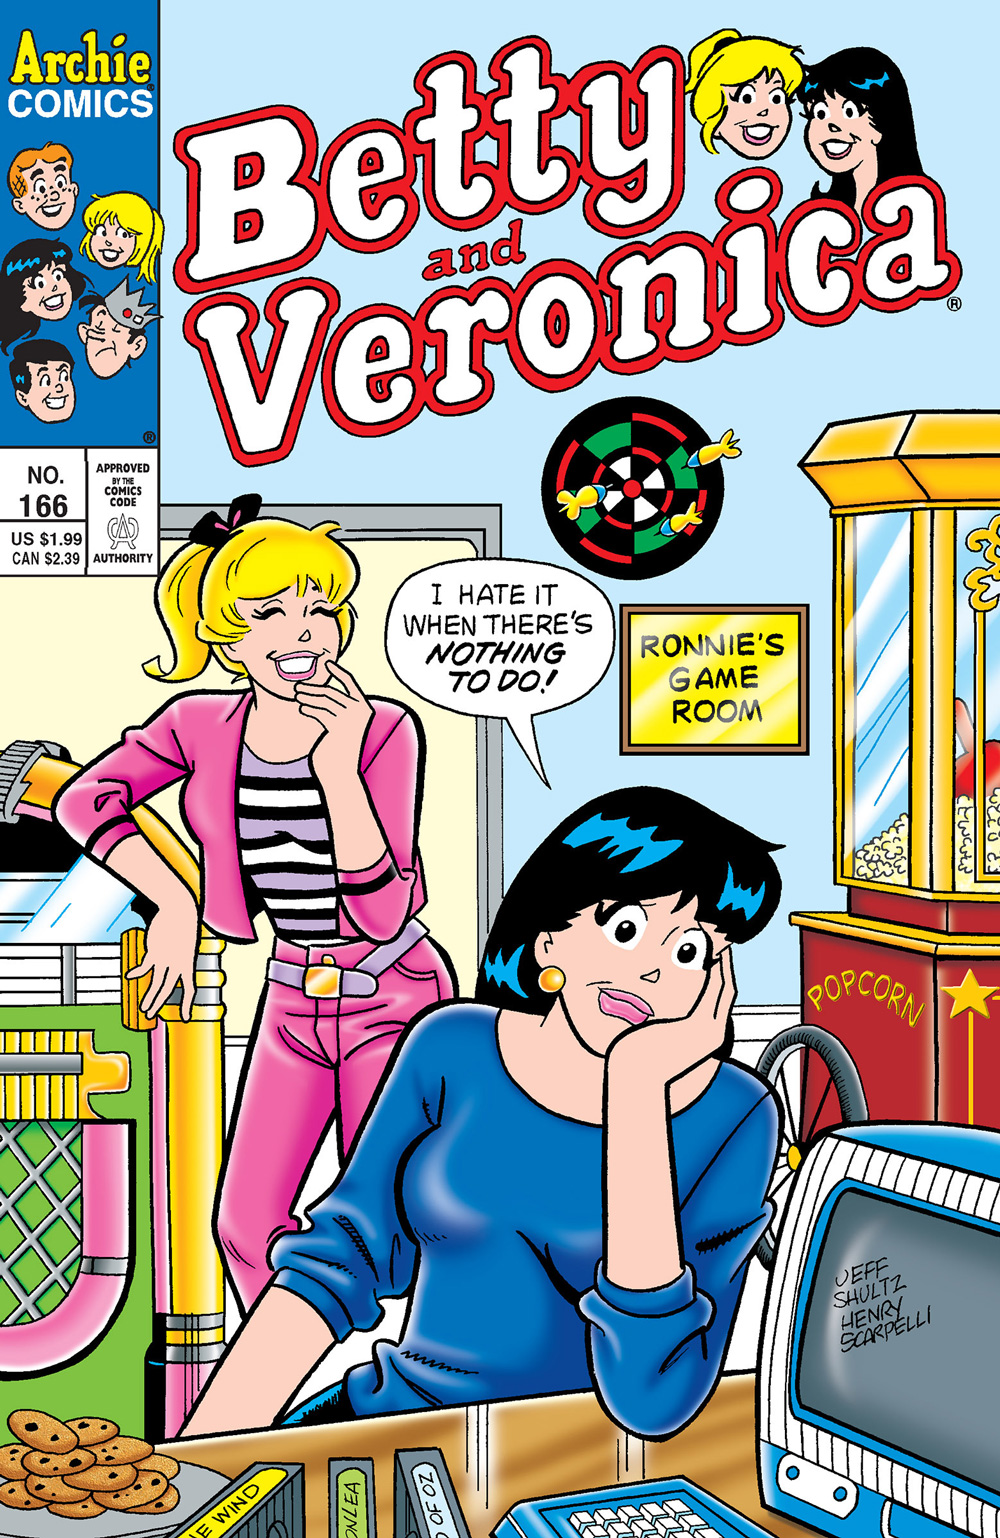 Veronica is sitting in her game room surrounded by fun things like a dart board, a jukebox, a computer, and a popcorn machine. She says she hates it when there's nothing to do, while Betty laughs in the background.